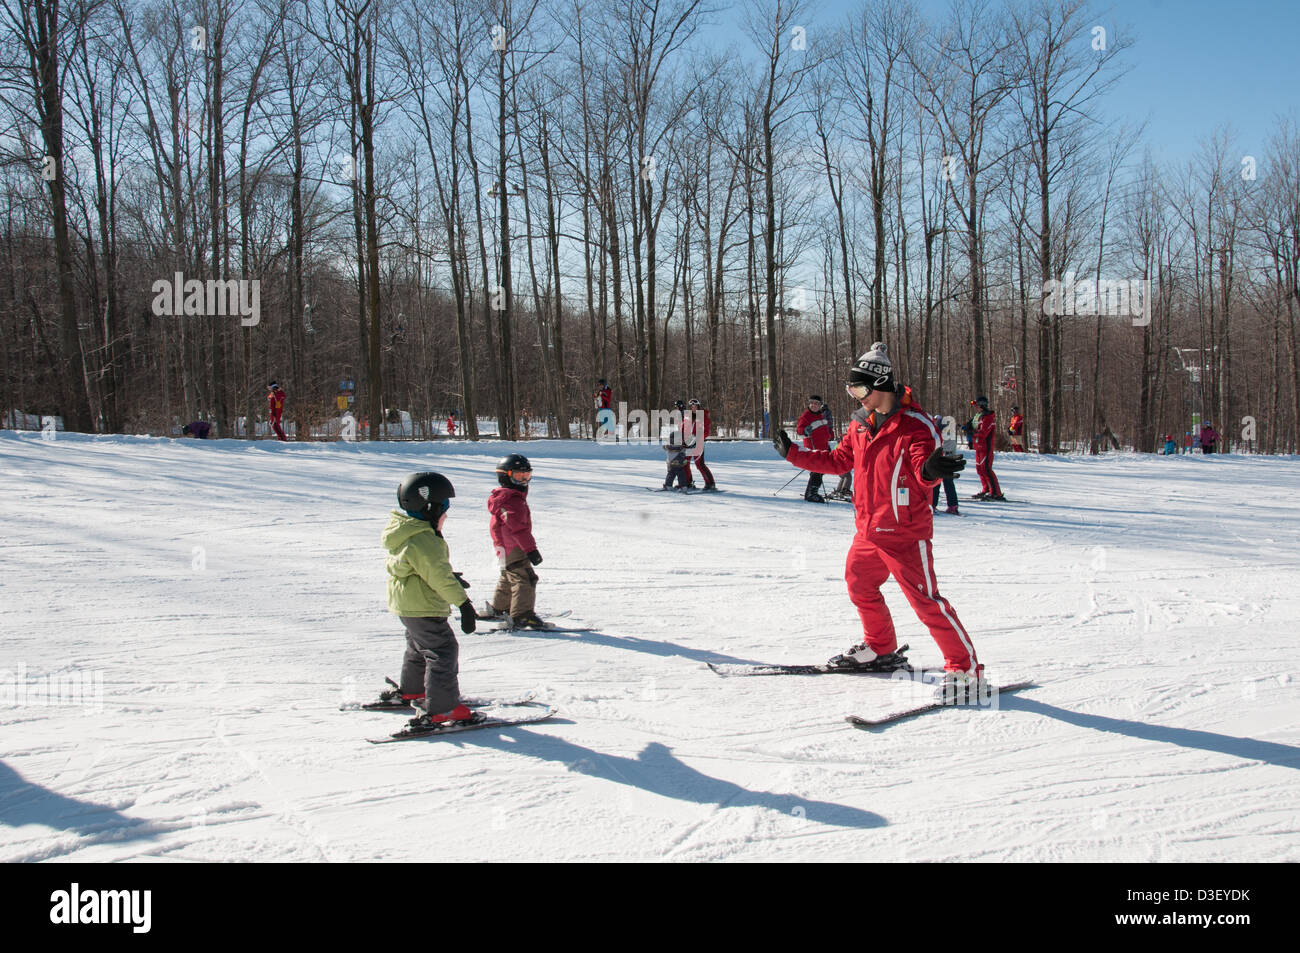 First Ski lesson of  children from Montreal who came with his parents for his first  private ski lesson The Ski Saint Bruno station open since 1965 has had 500 000 students graduating from its ski school. Stock Photo